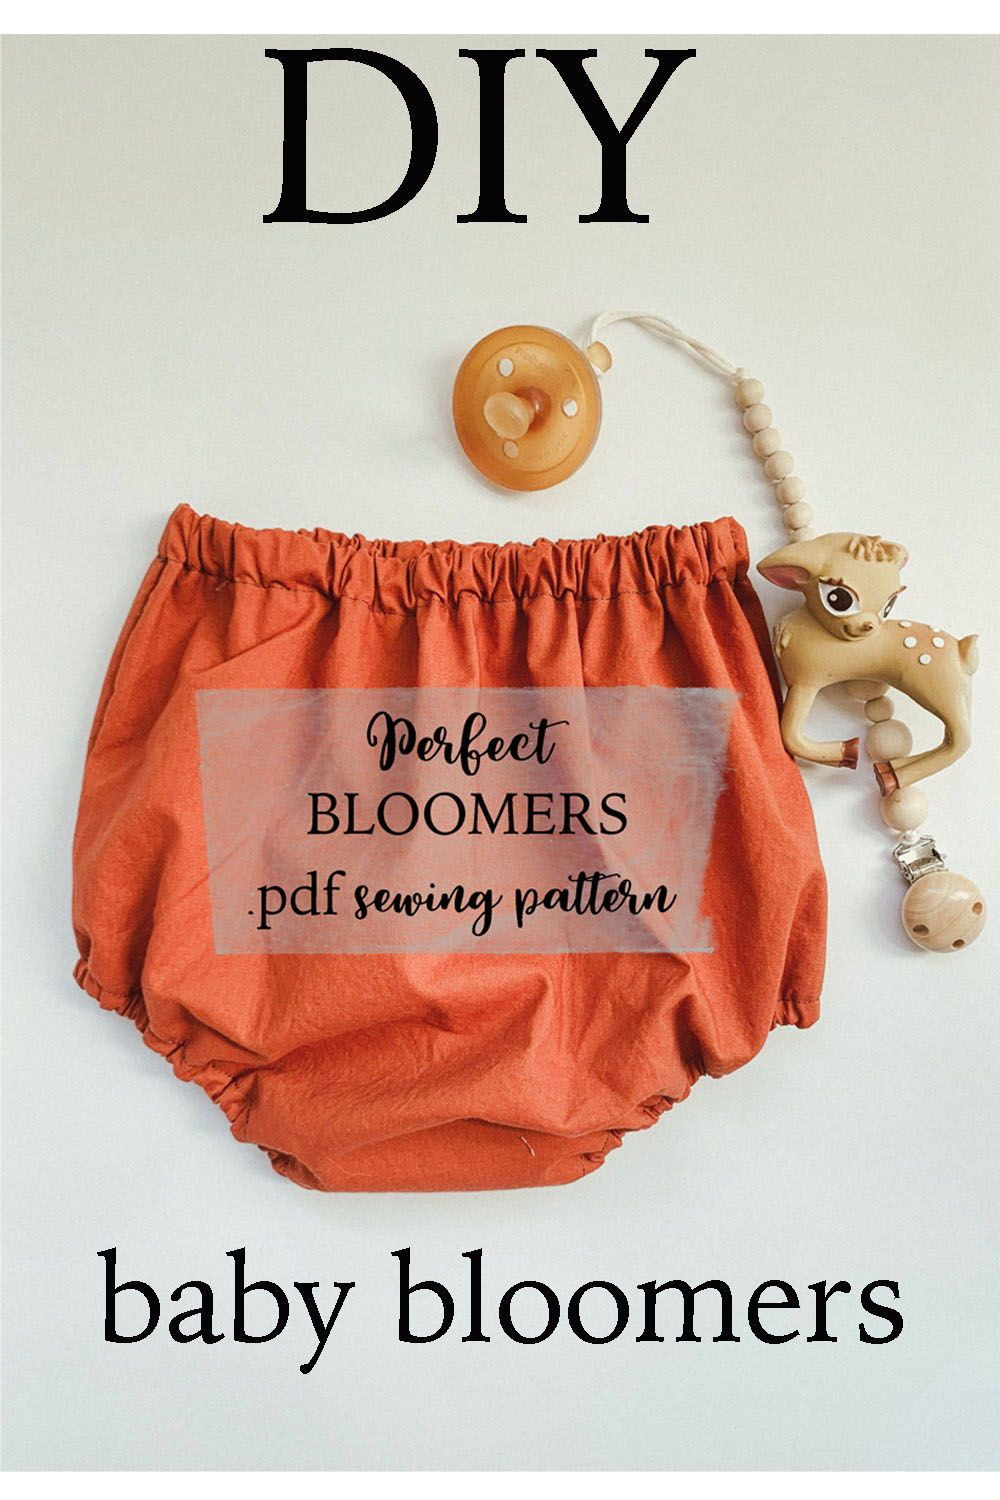 DIY Baby Bloomers
 The perfectbabybloomers DIY pattern These bloomers are